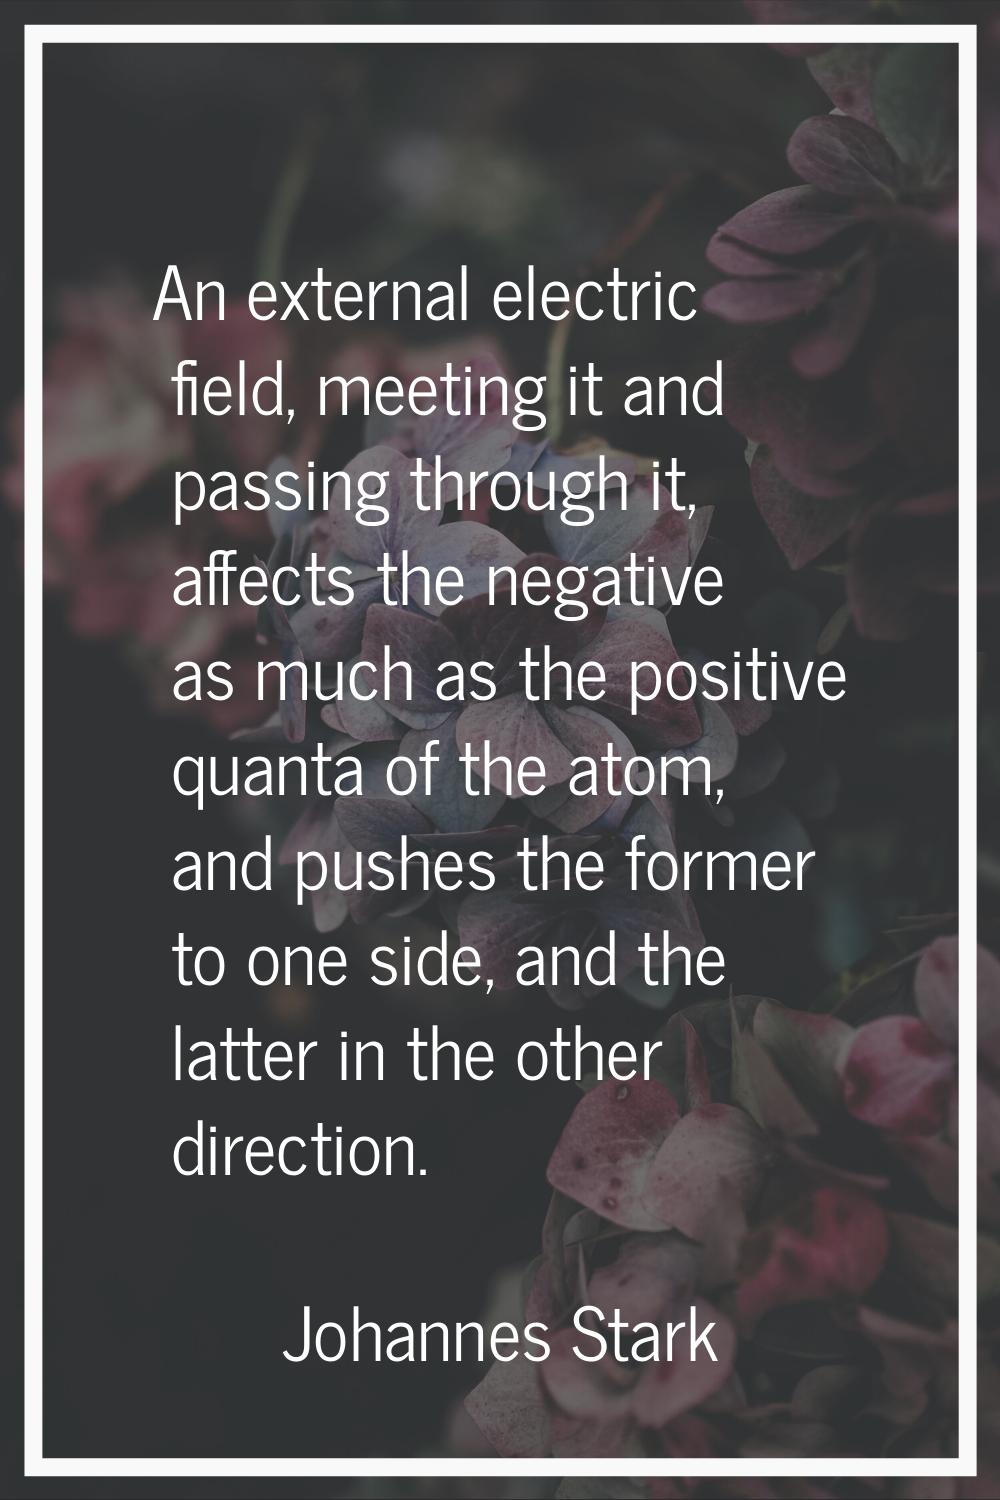 An external electric field, meeting it and passing through it, affects the negative as much as the 